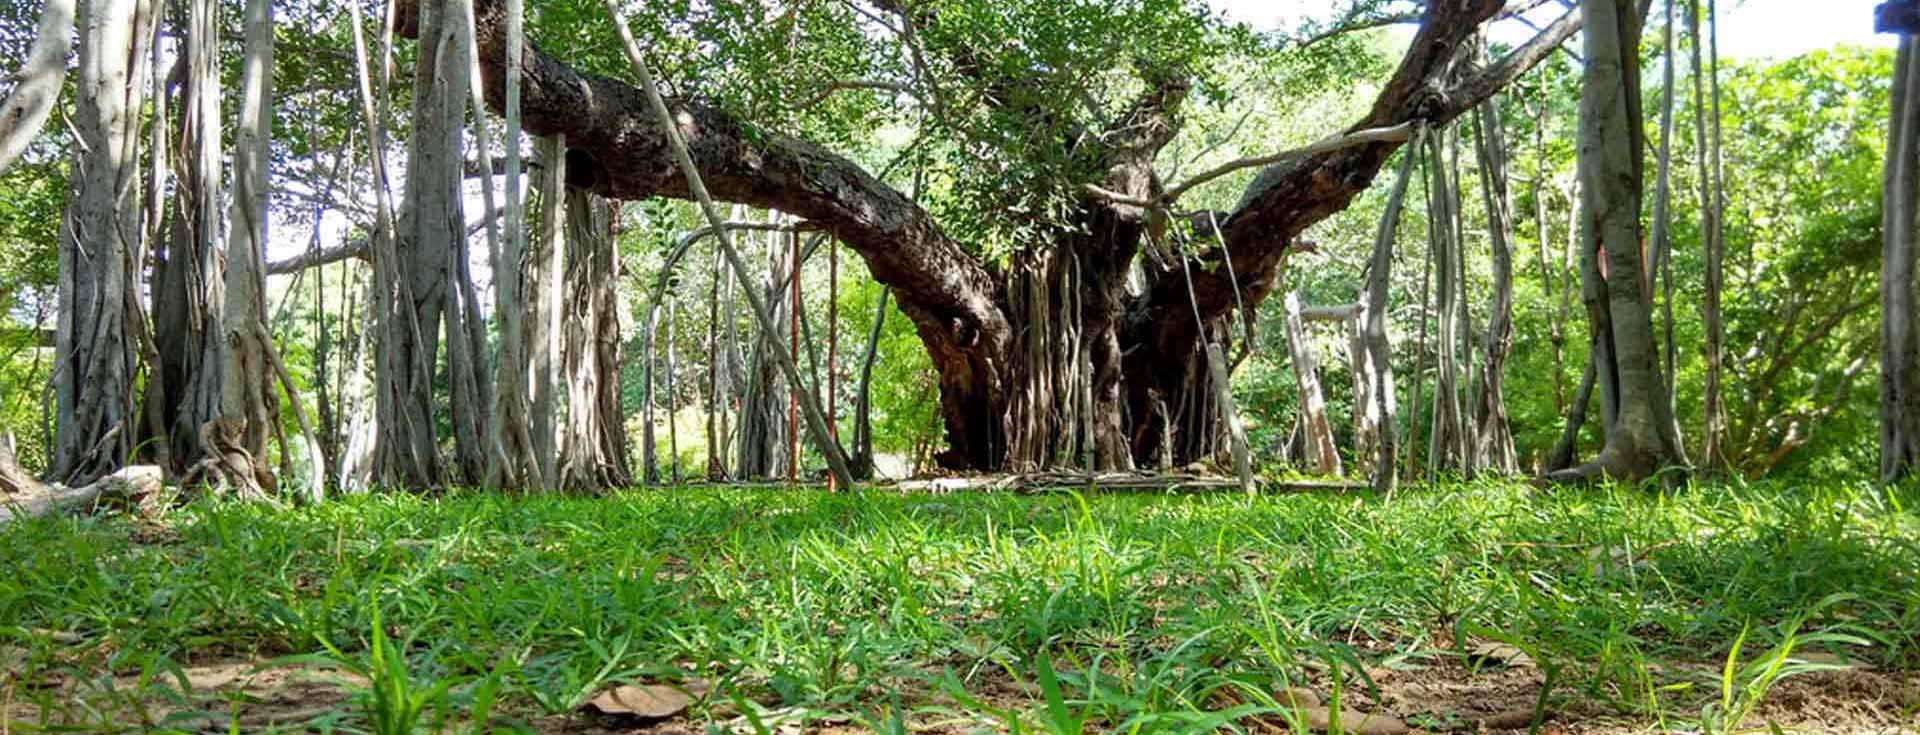 5 Wildlife sanctuaries that you must not miss when in Chennai